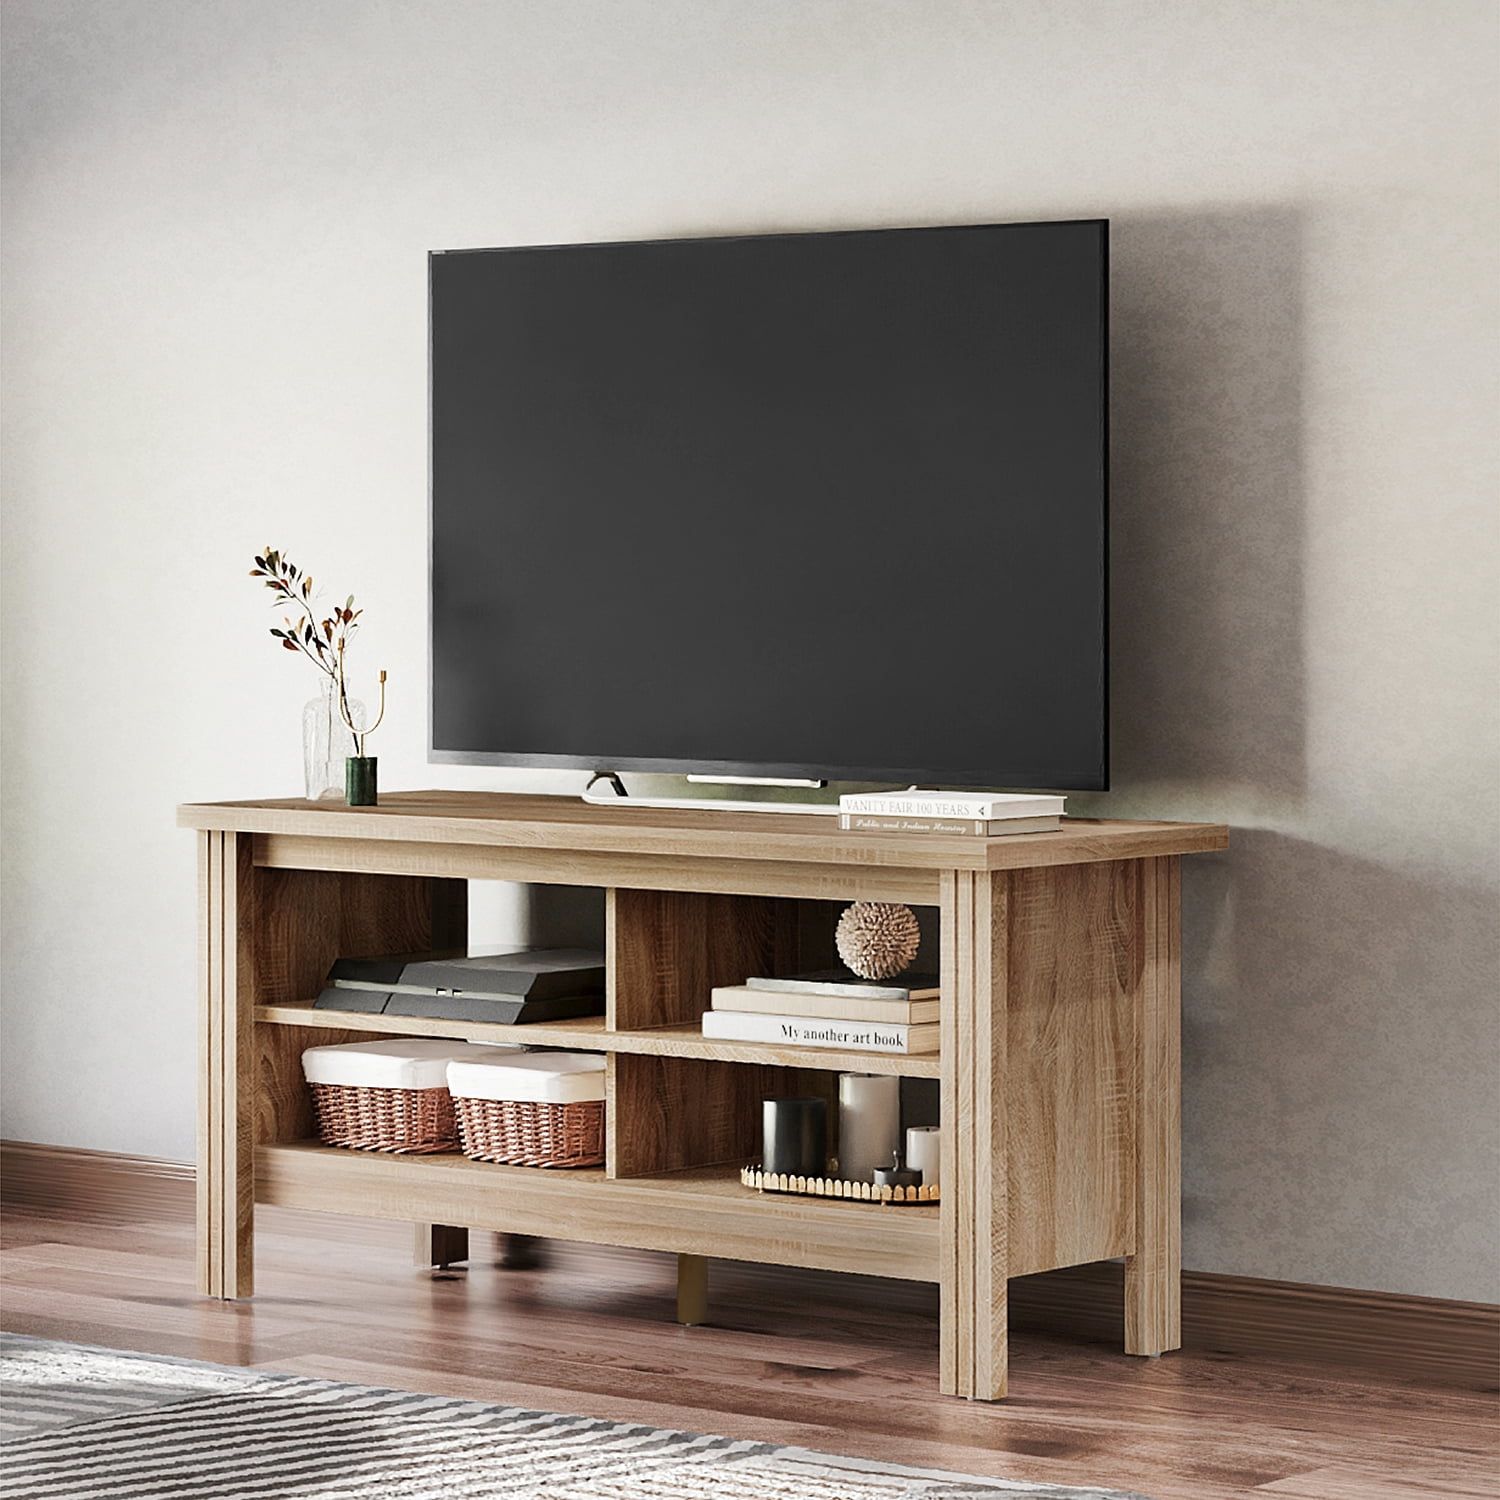 Farmhouse Tv Stands For 55 Inch Tv Wood Media Console Storage Cabinet With Regard To Farmhouse Media Entertainment Centers (View 11 of 20)